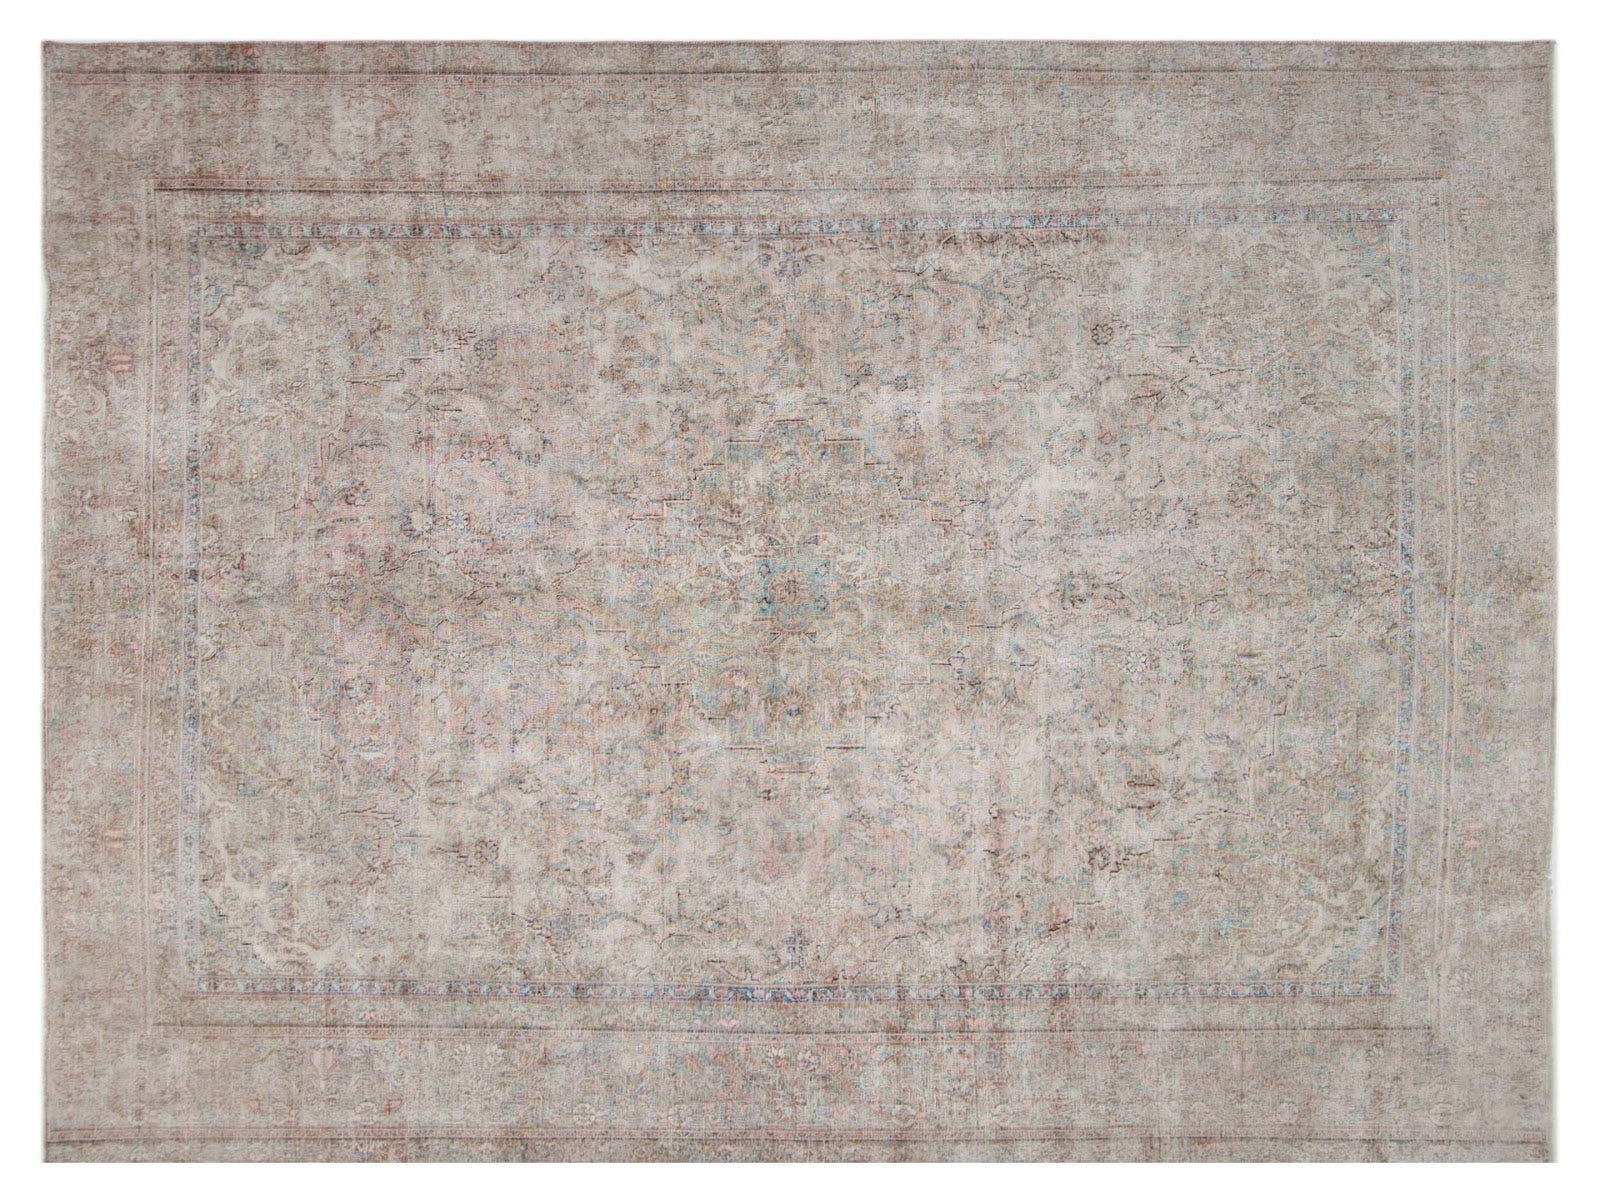 9x12 vintage Persian rug hand-knotted in 100% wool, featuring neutral earth tones and a subtly faded Persian design.